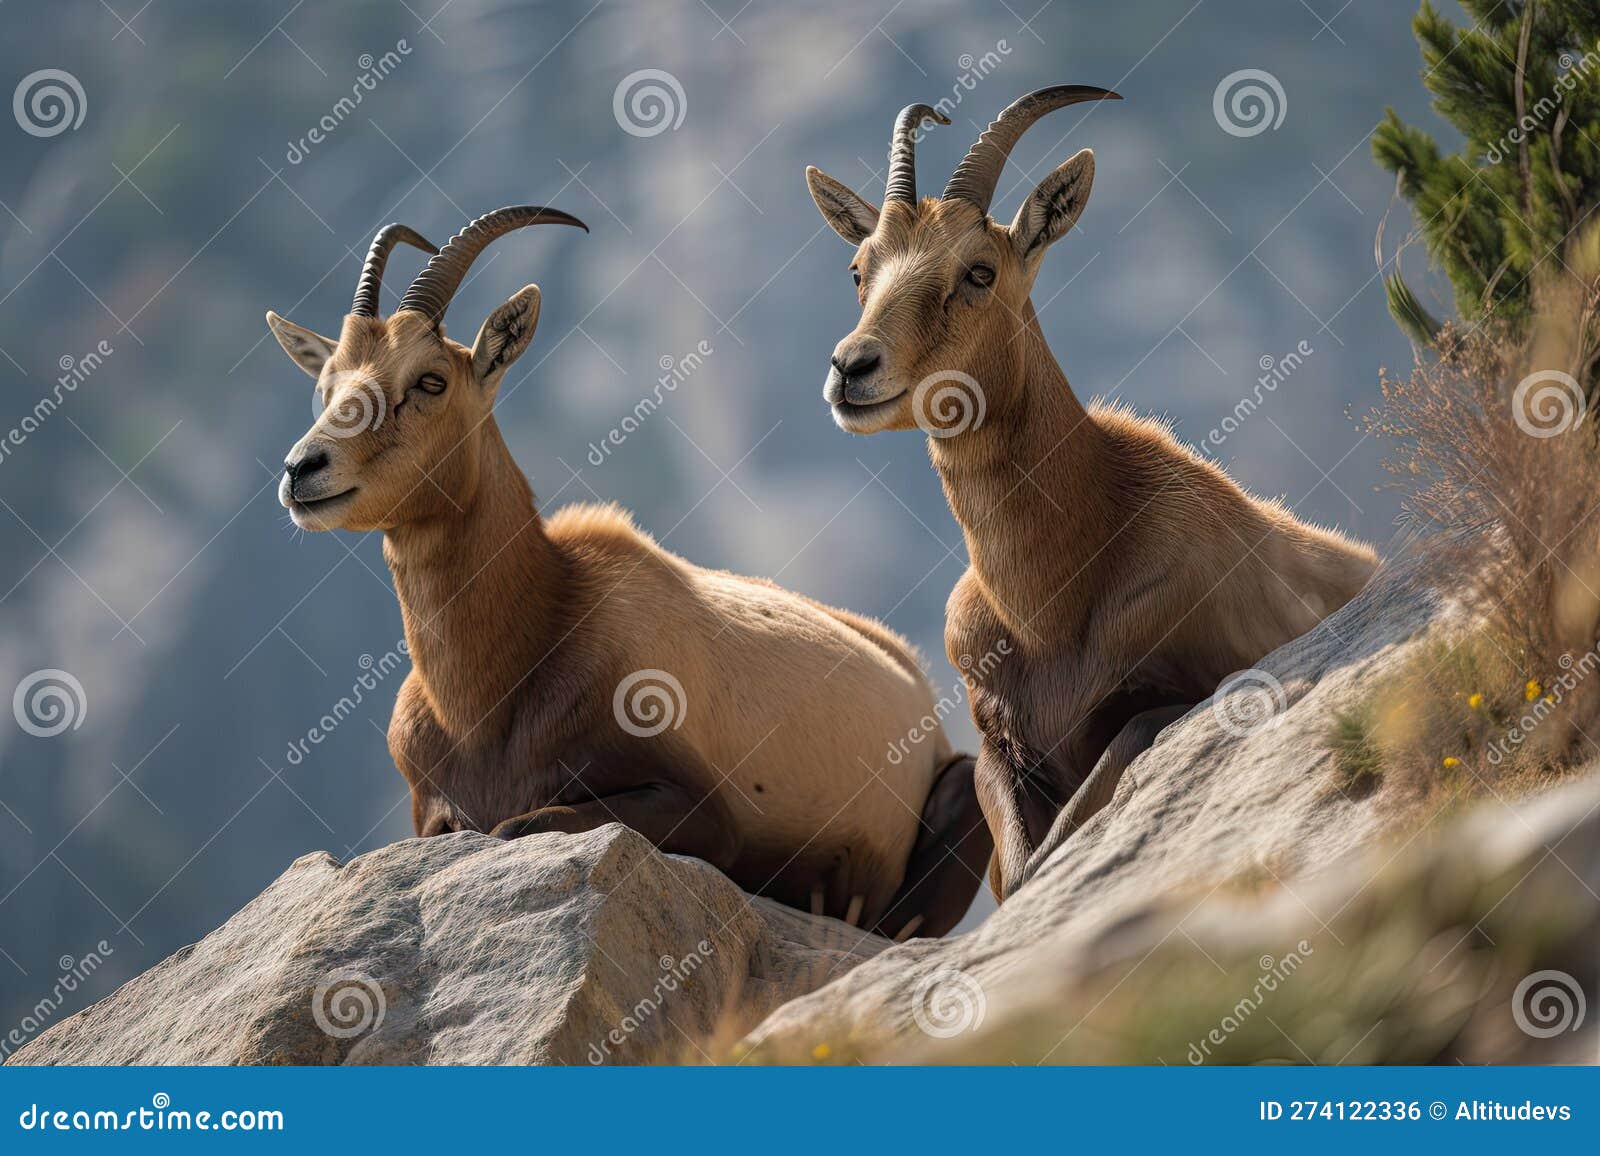 pair of ibex perched on a cliffside, with their hoofs and horns in full view